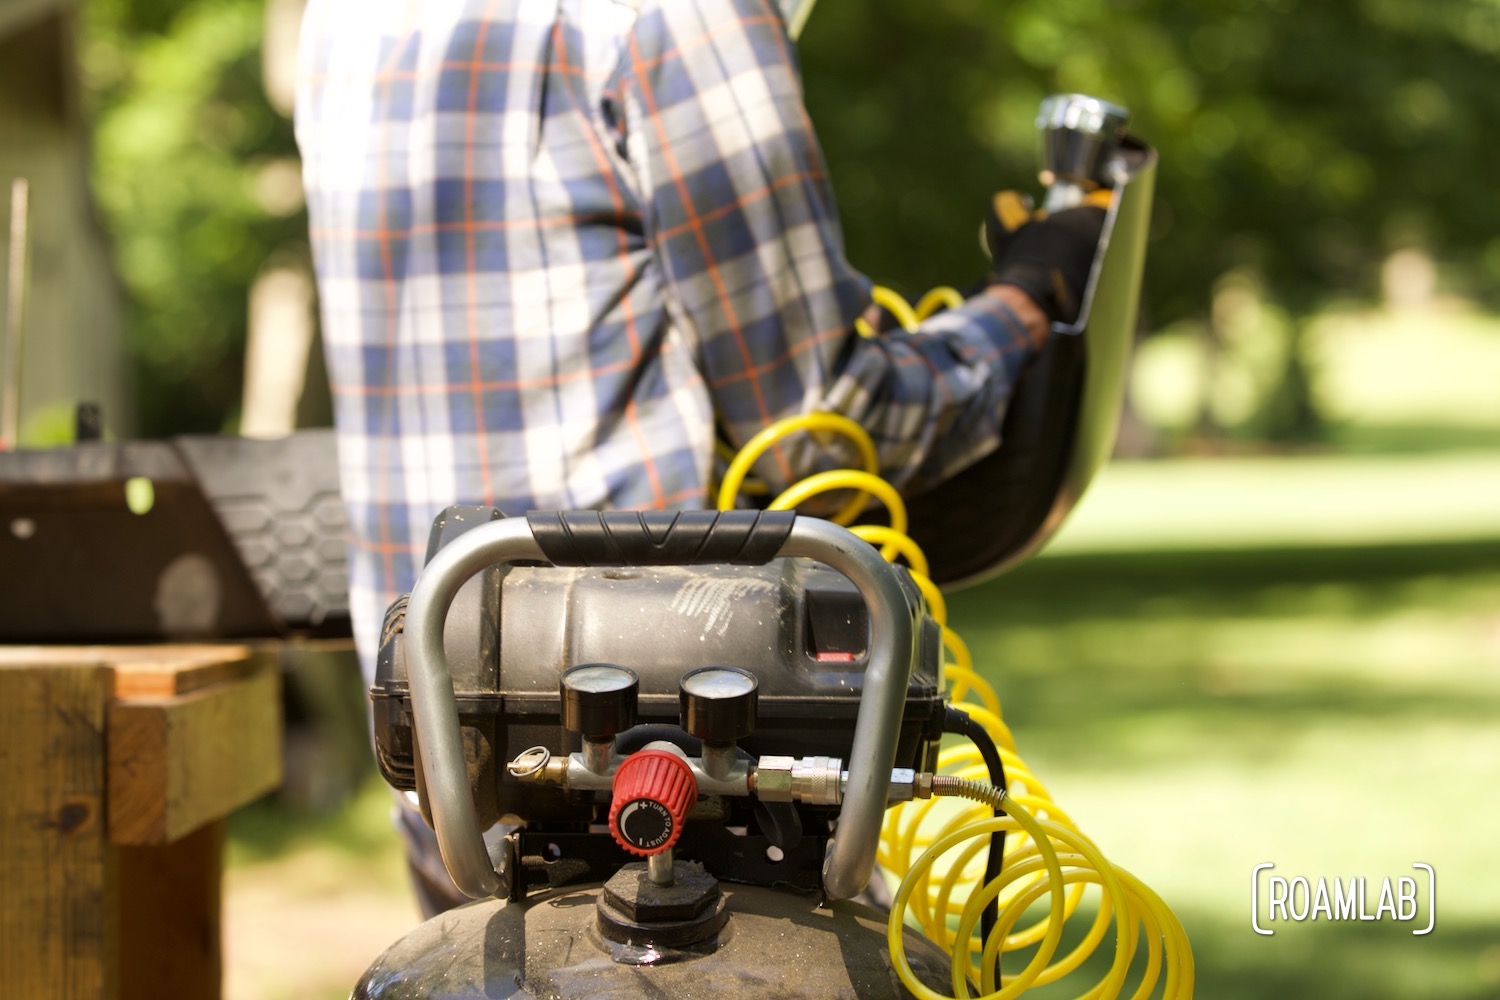 Air compressor in the foreground with a yellow cord connected to a cut-off tool held by a man in the background.